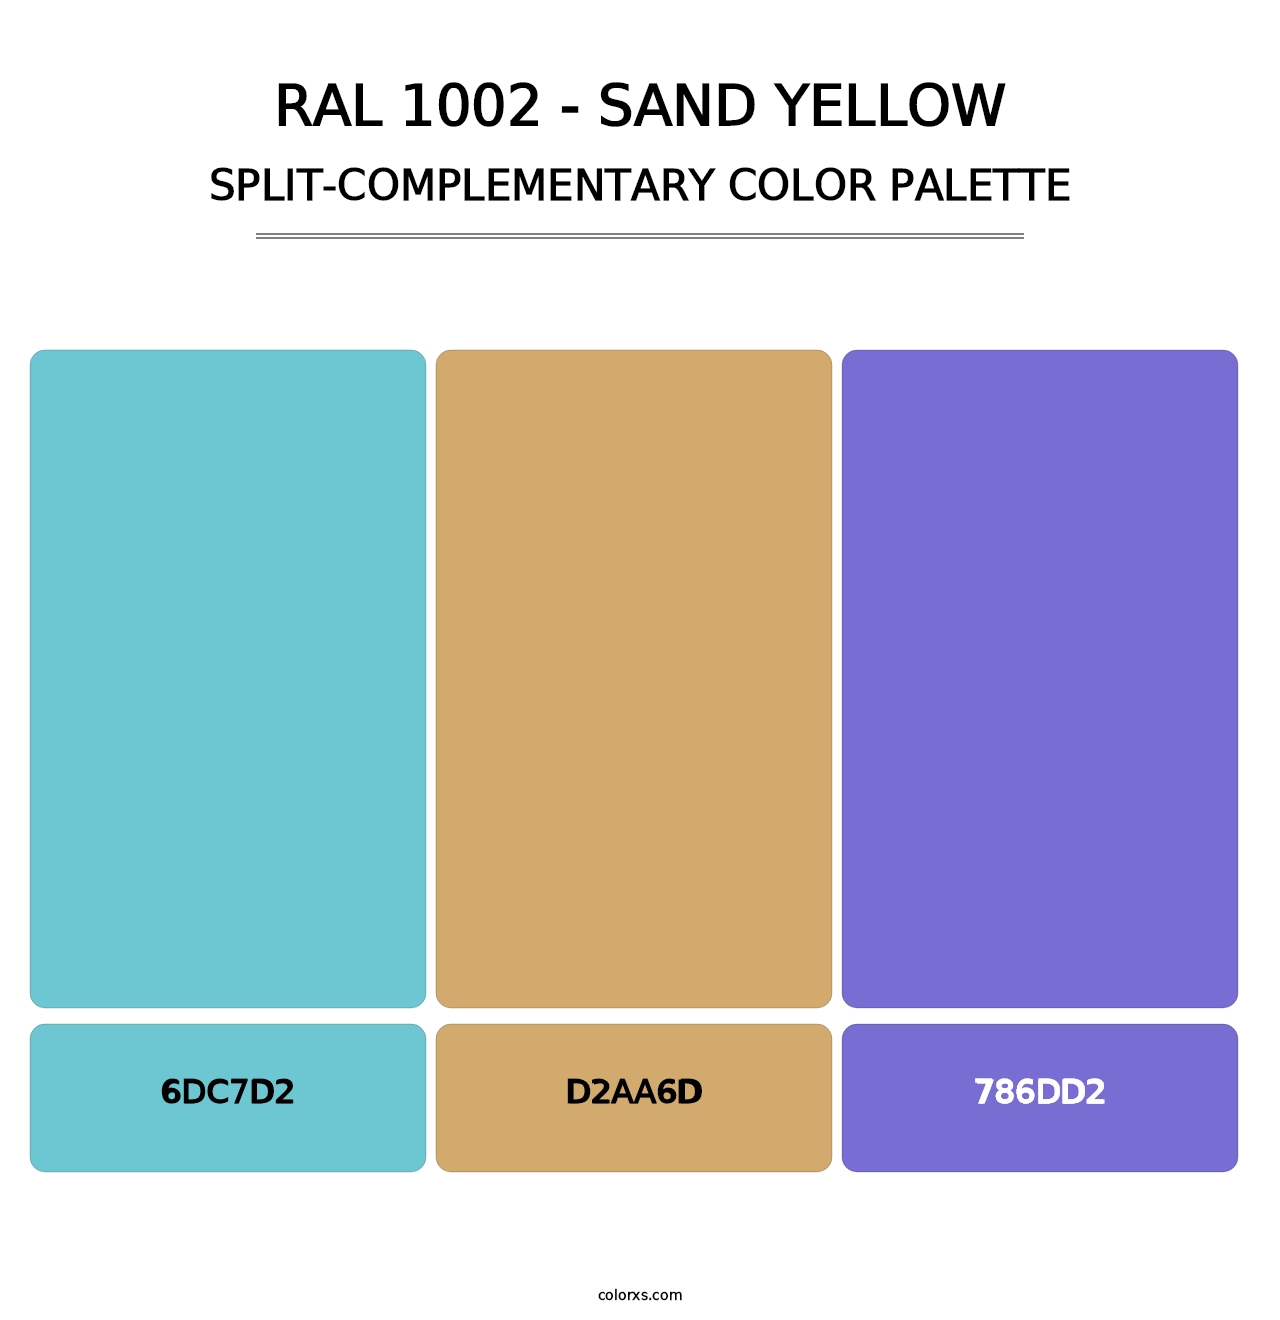 RAL 1002 - Sand Yellow - Split-Complementary Color Palette